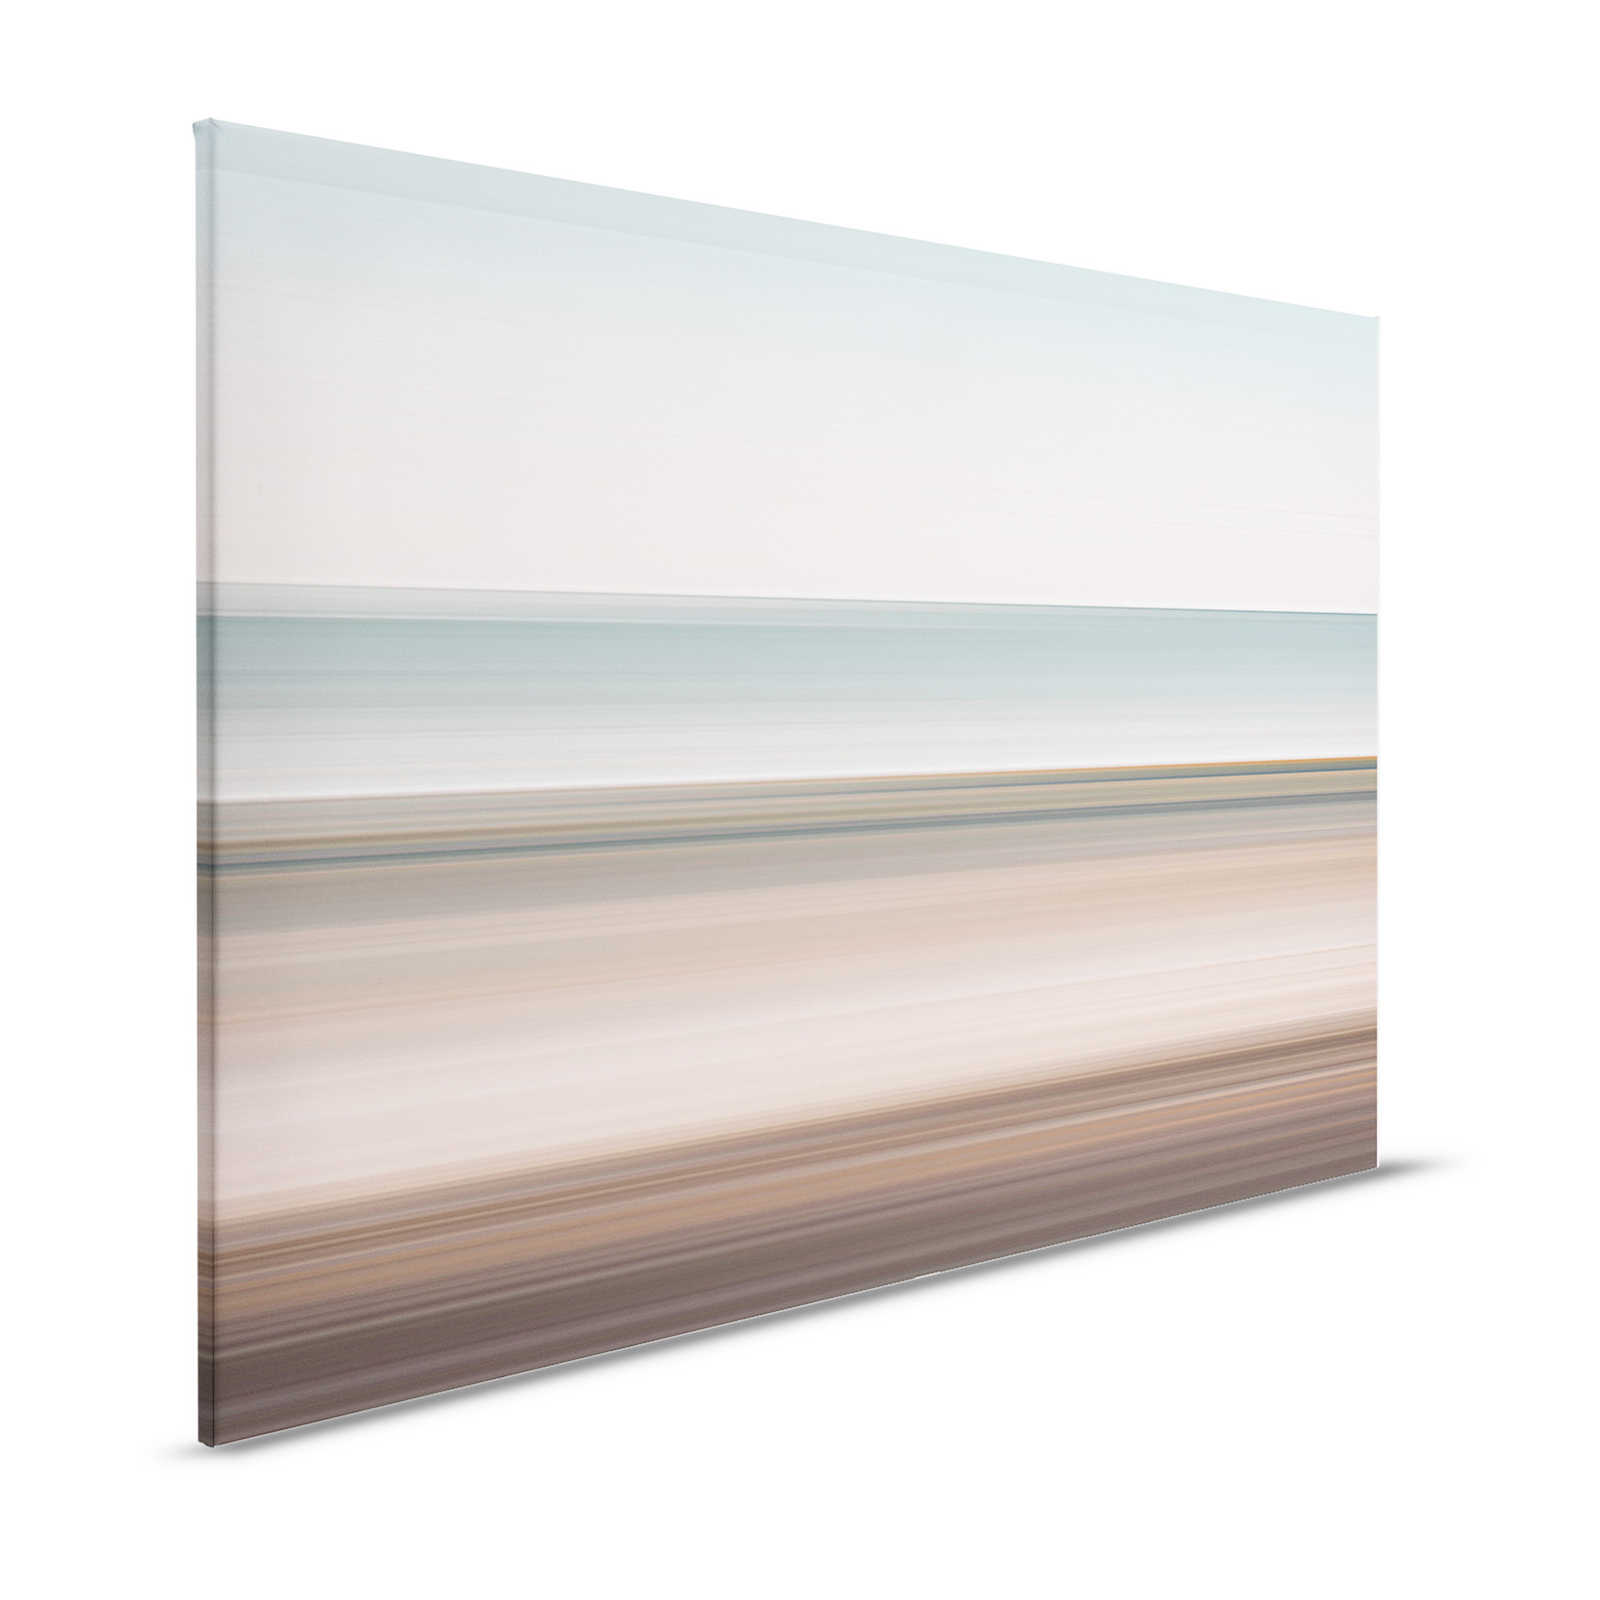 Horizon 2 - Canvas painting abstract landscape with line design - 1,20 m x 0,80 m
